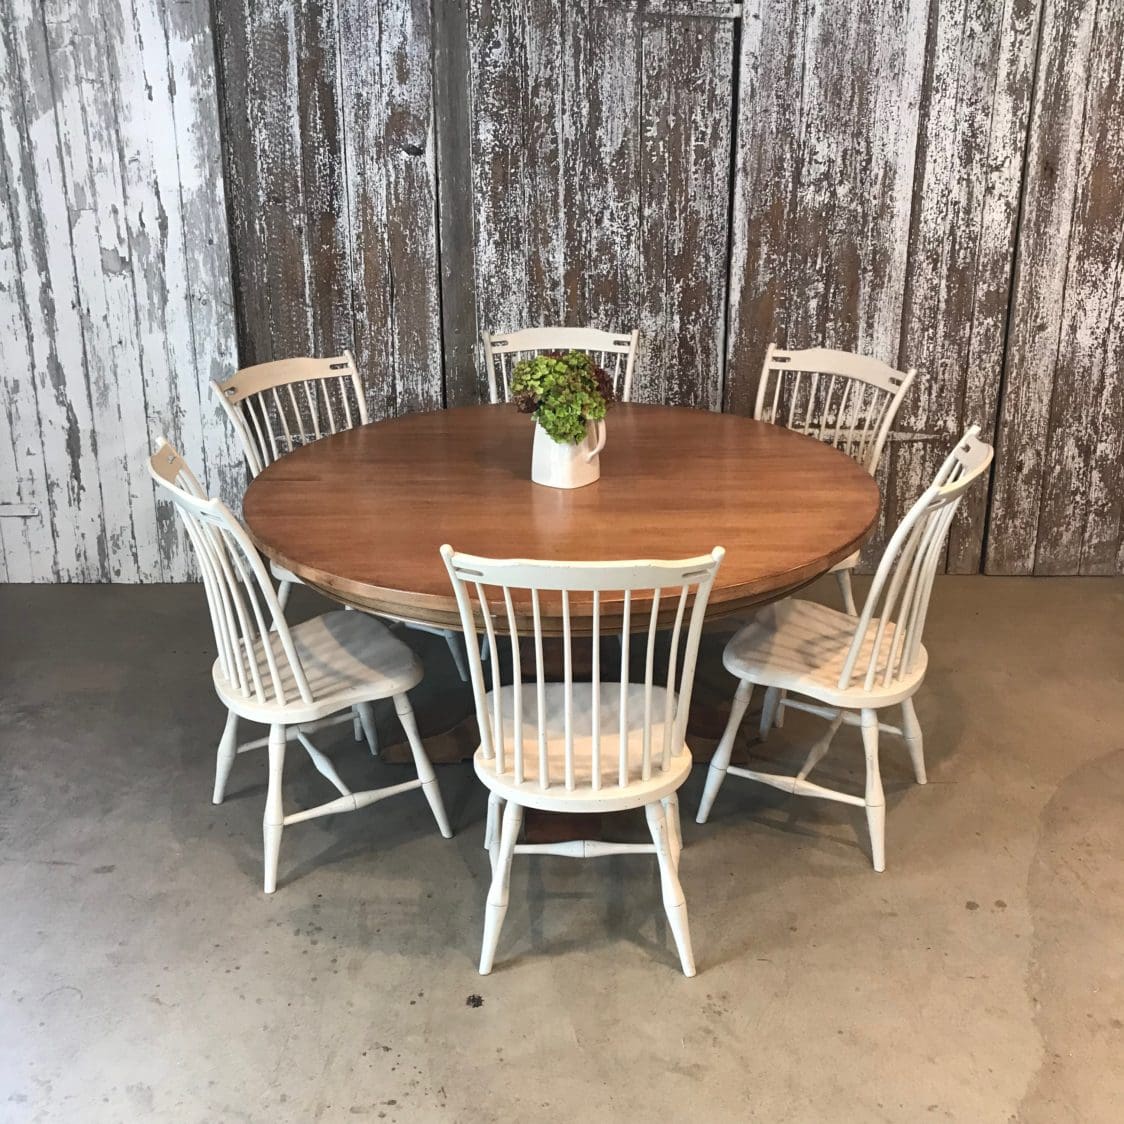 Round pedestal table in maple wood in light finish with white chairs